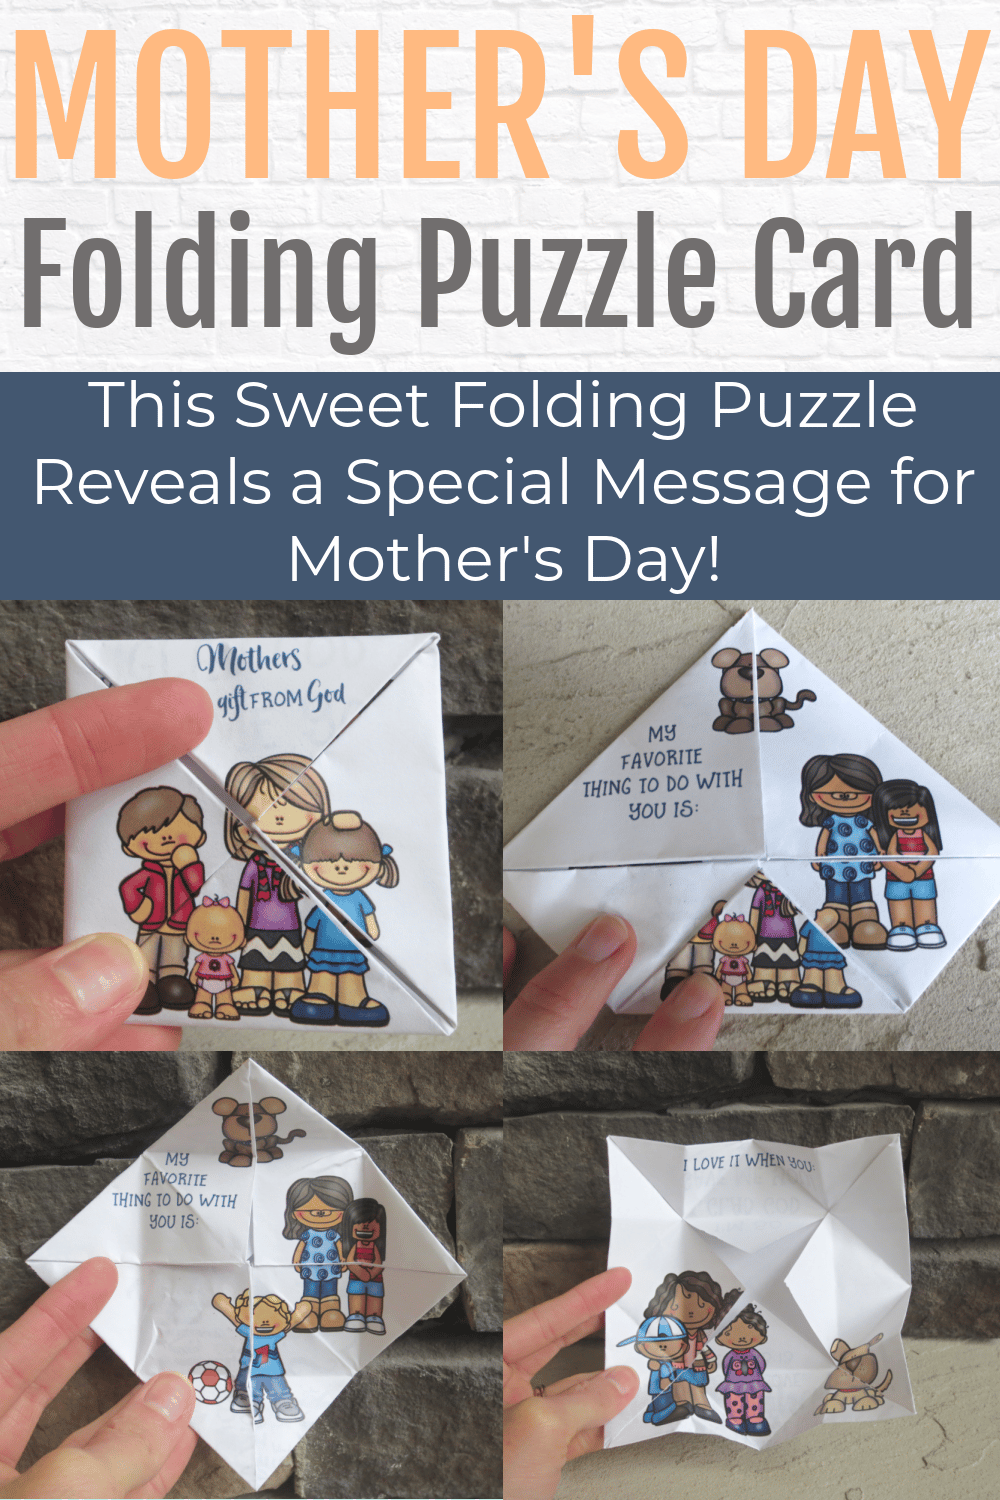 Here's a fun foldable puzzle Mother's Day Card that opens up one layer at a time to reveal new pages and messages - great for Sunday School or classroom use